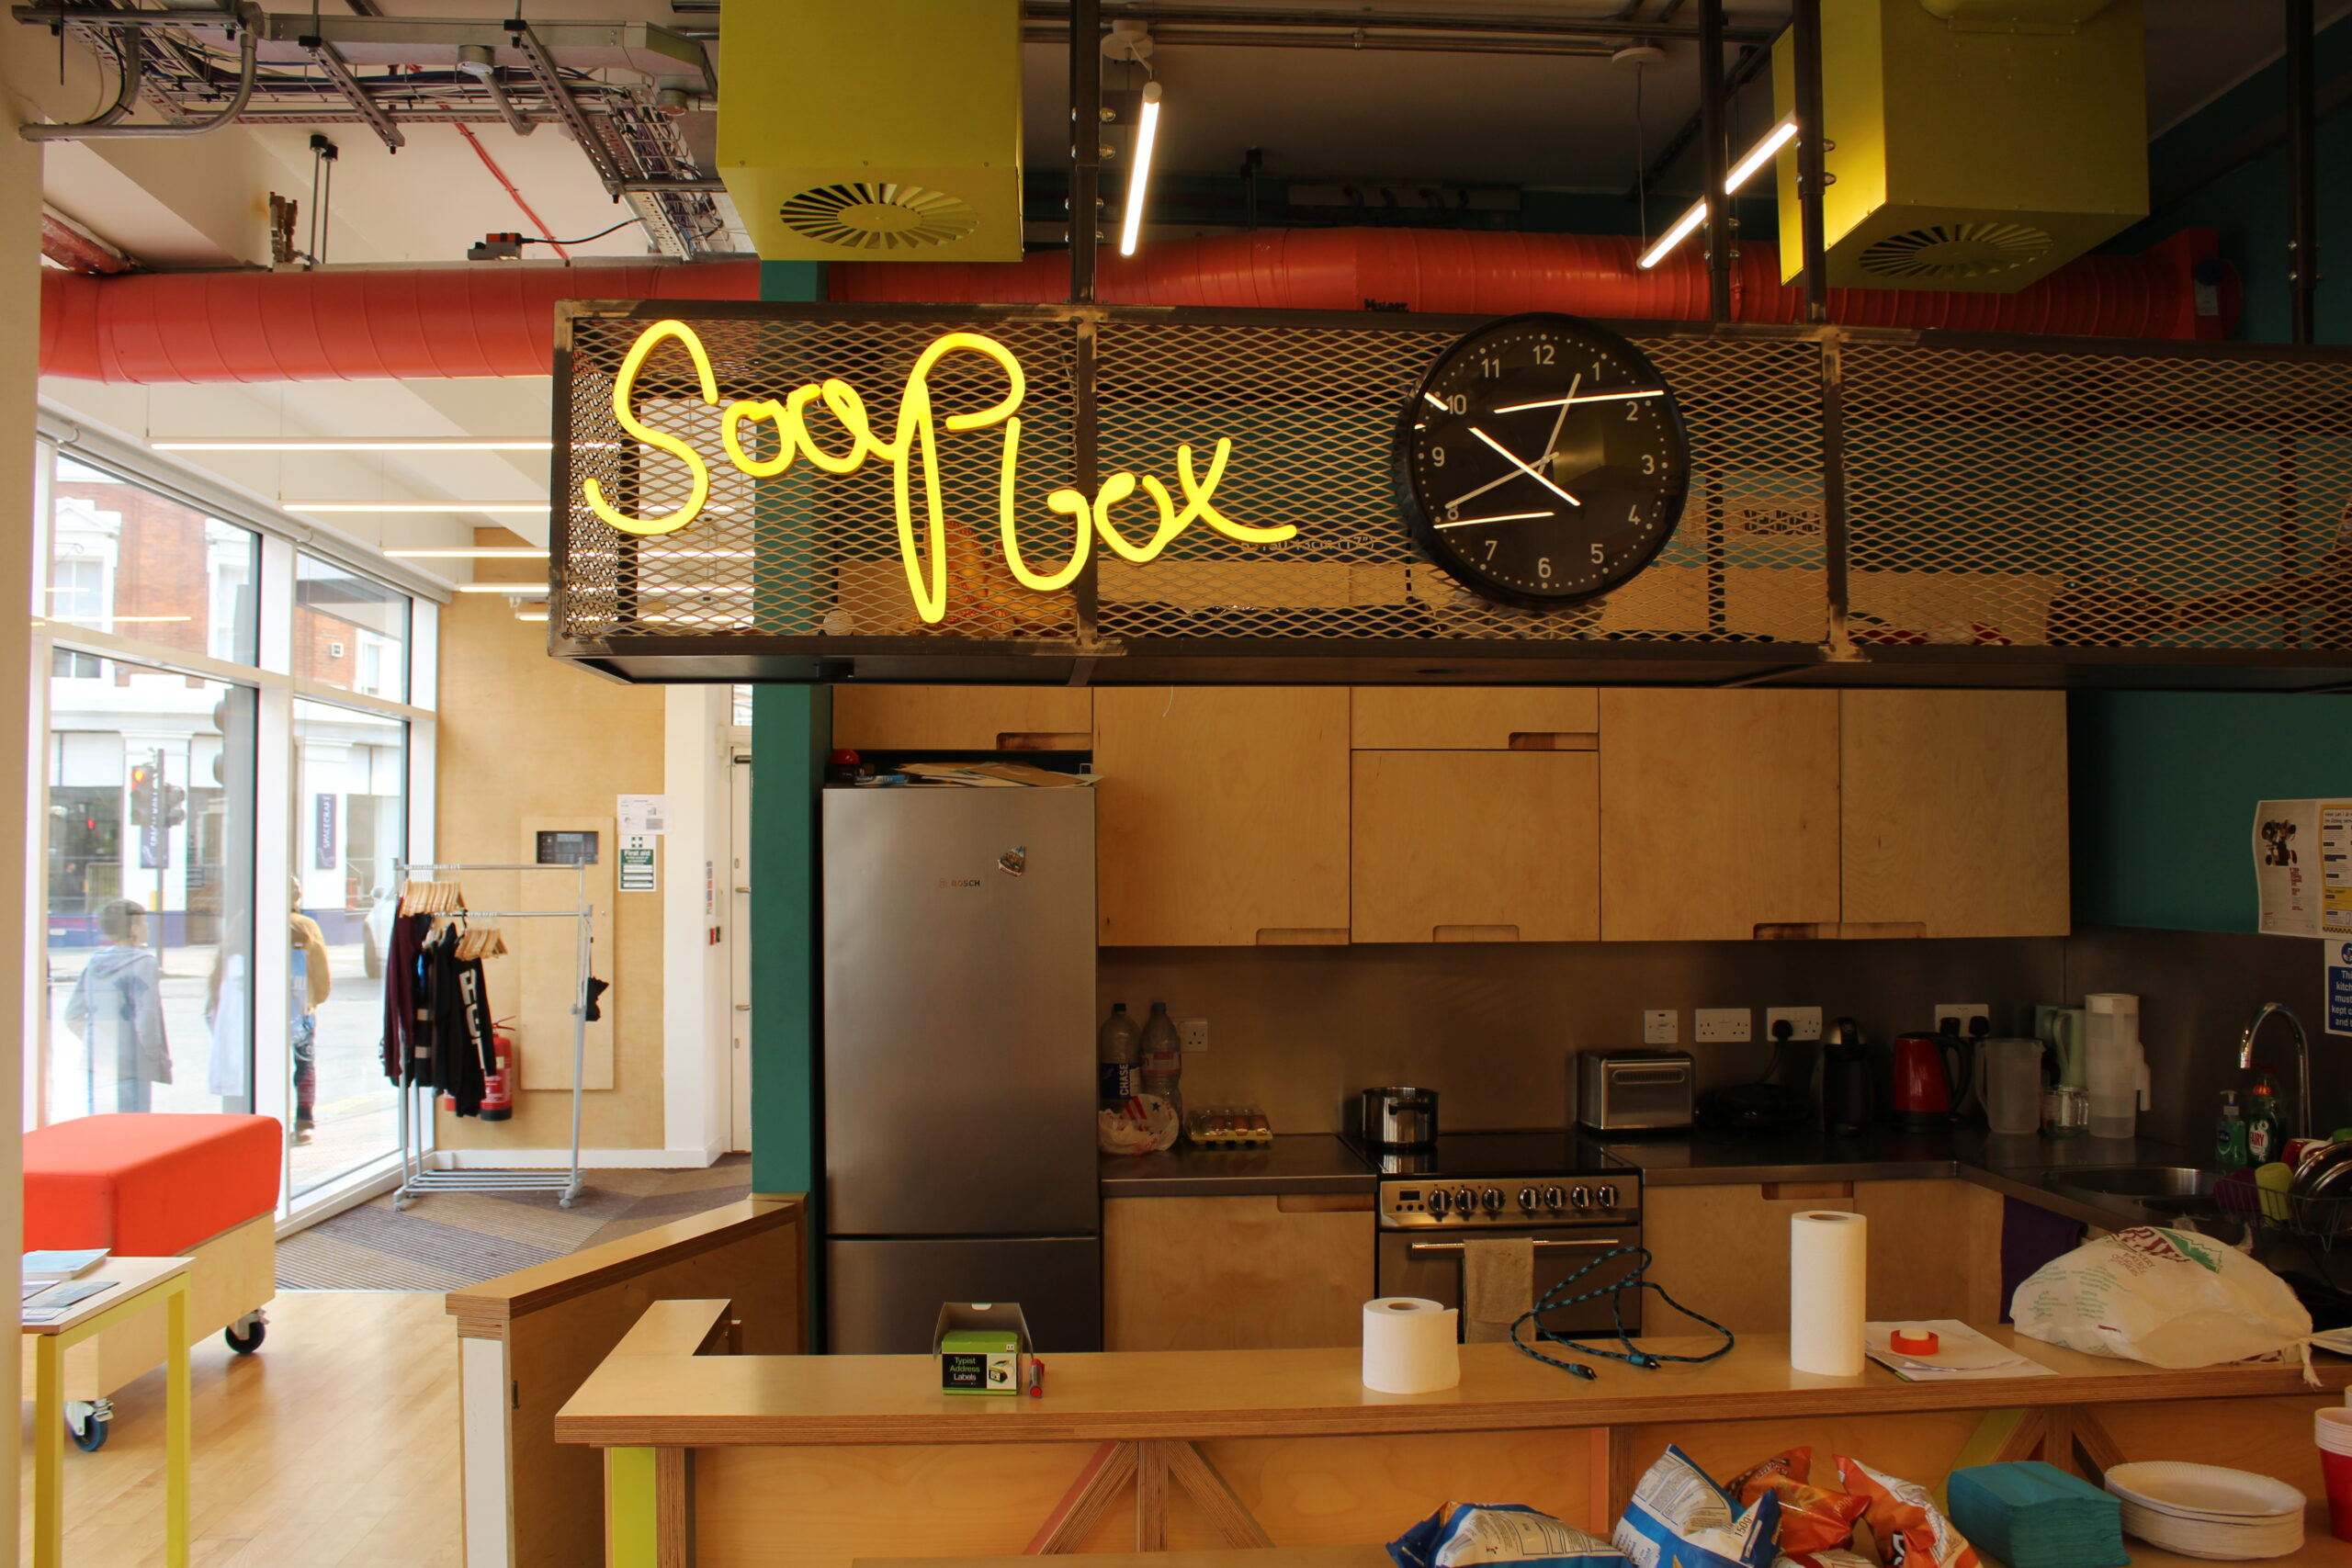 A neon sign above a kitchen reads 'soapbox'